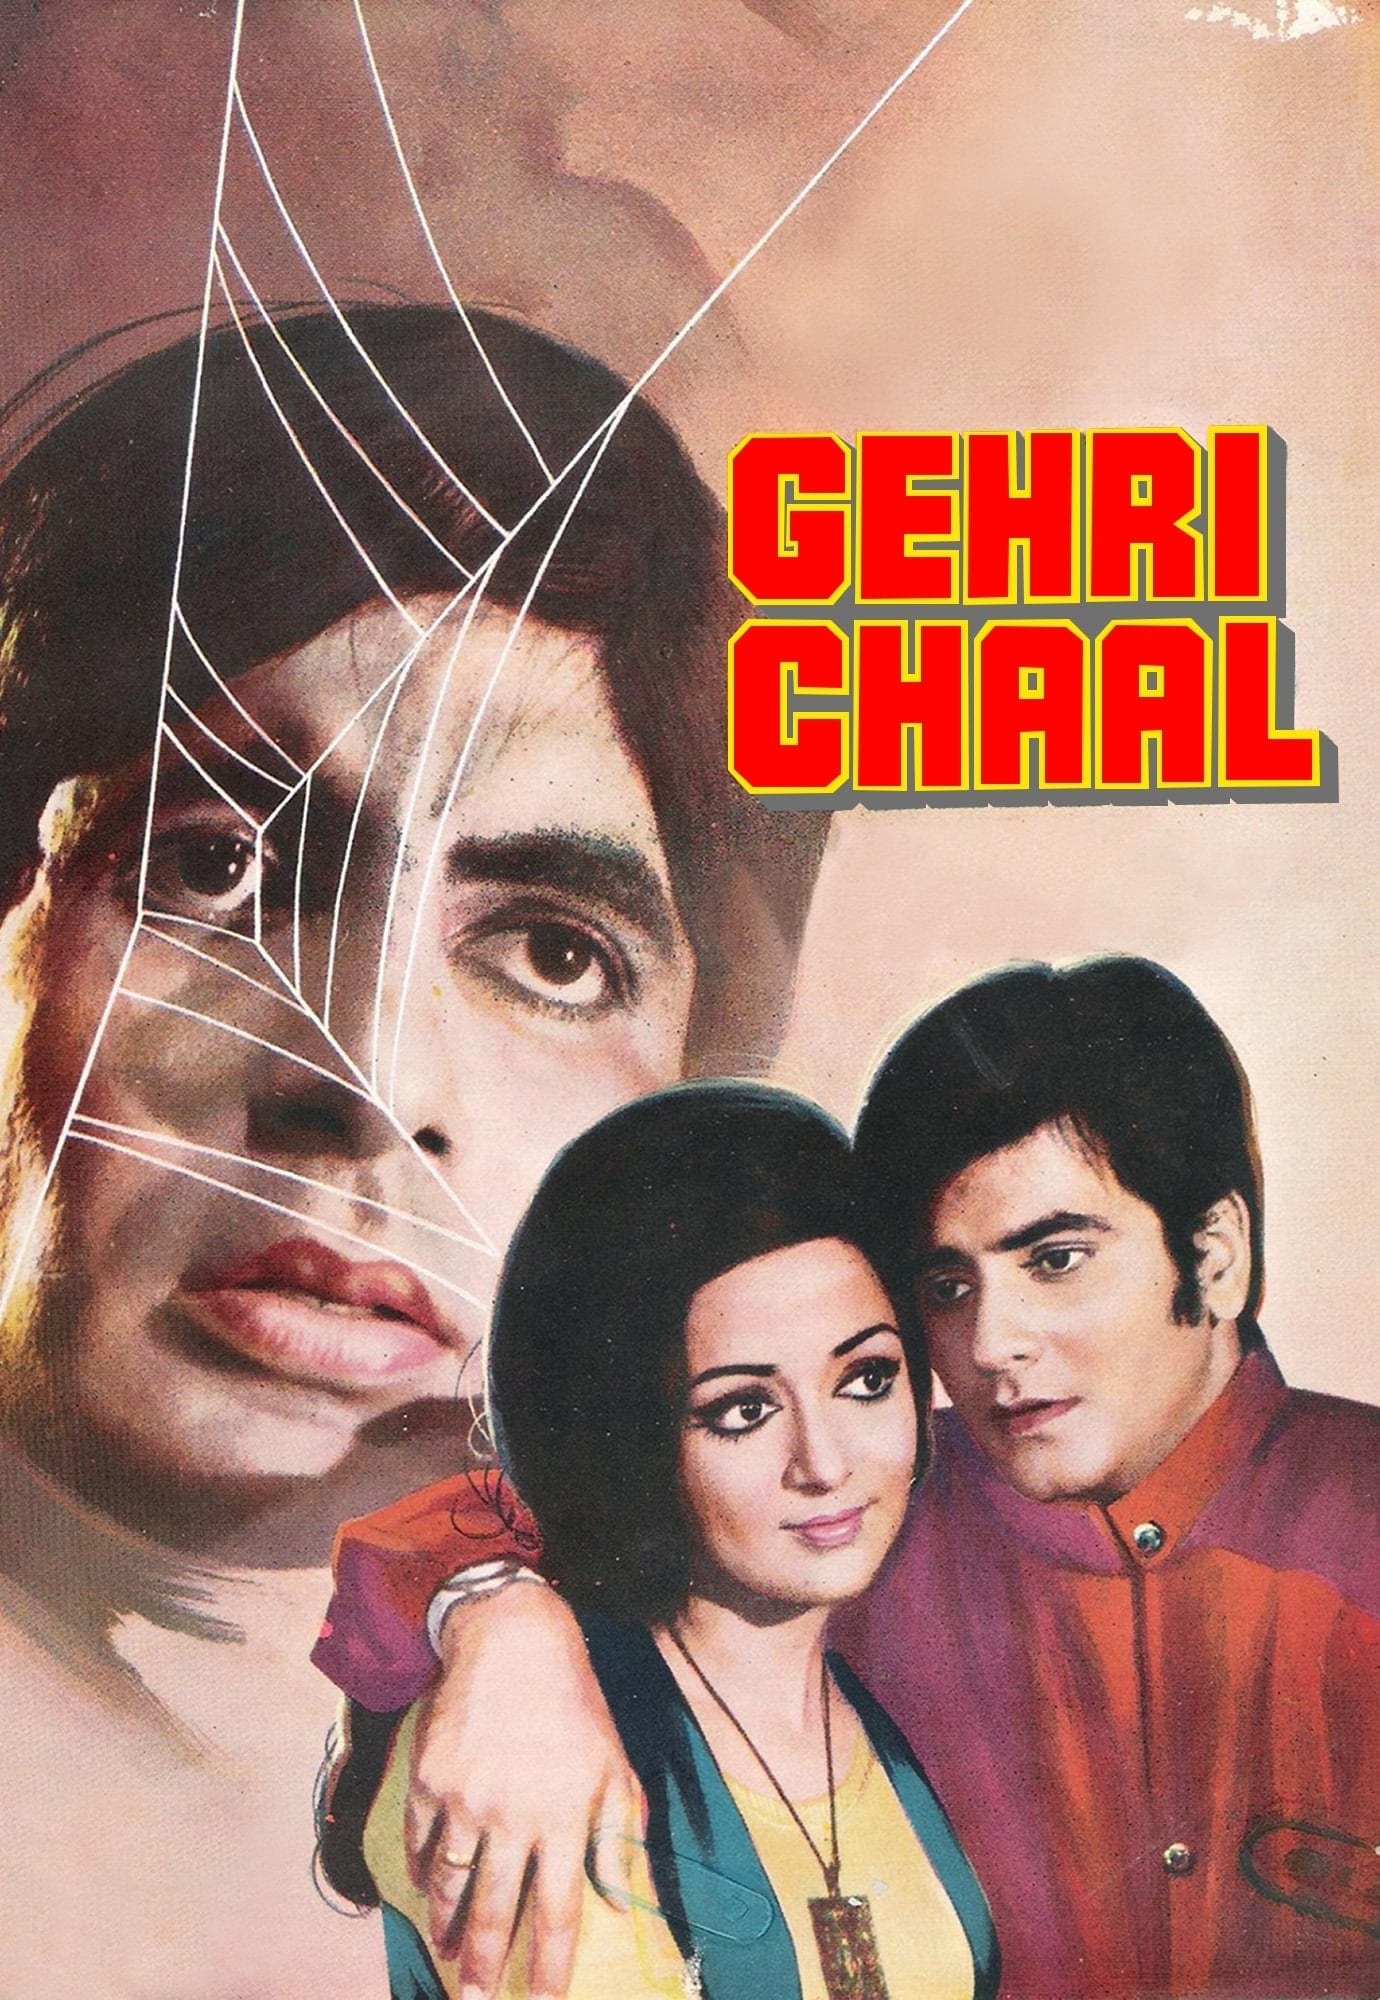 Poster for the movie "Gehri Chaal"